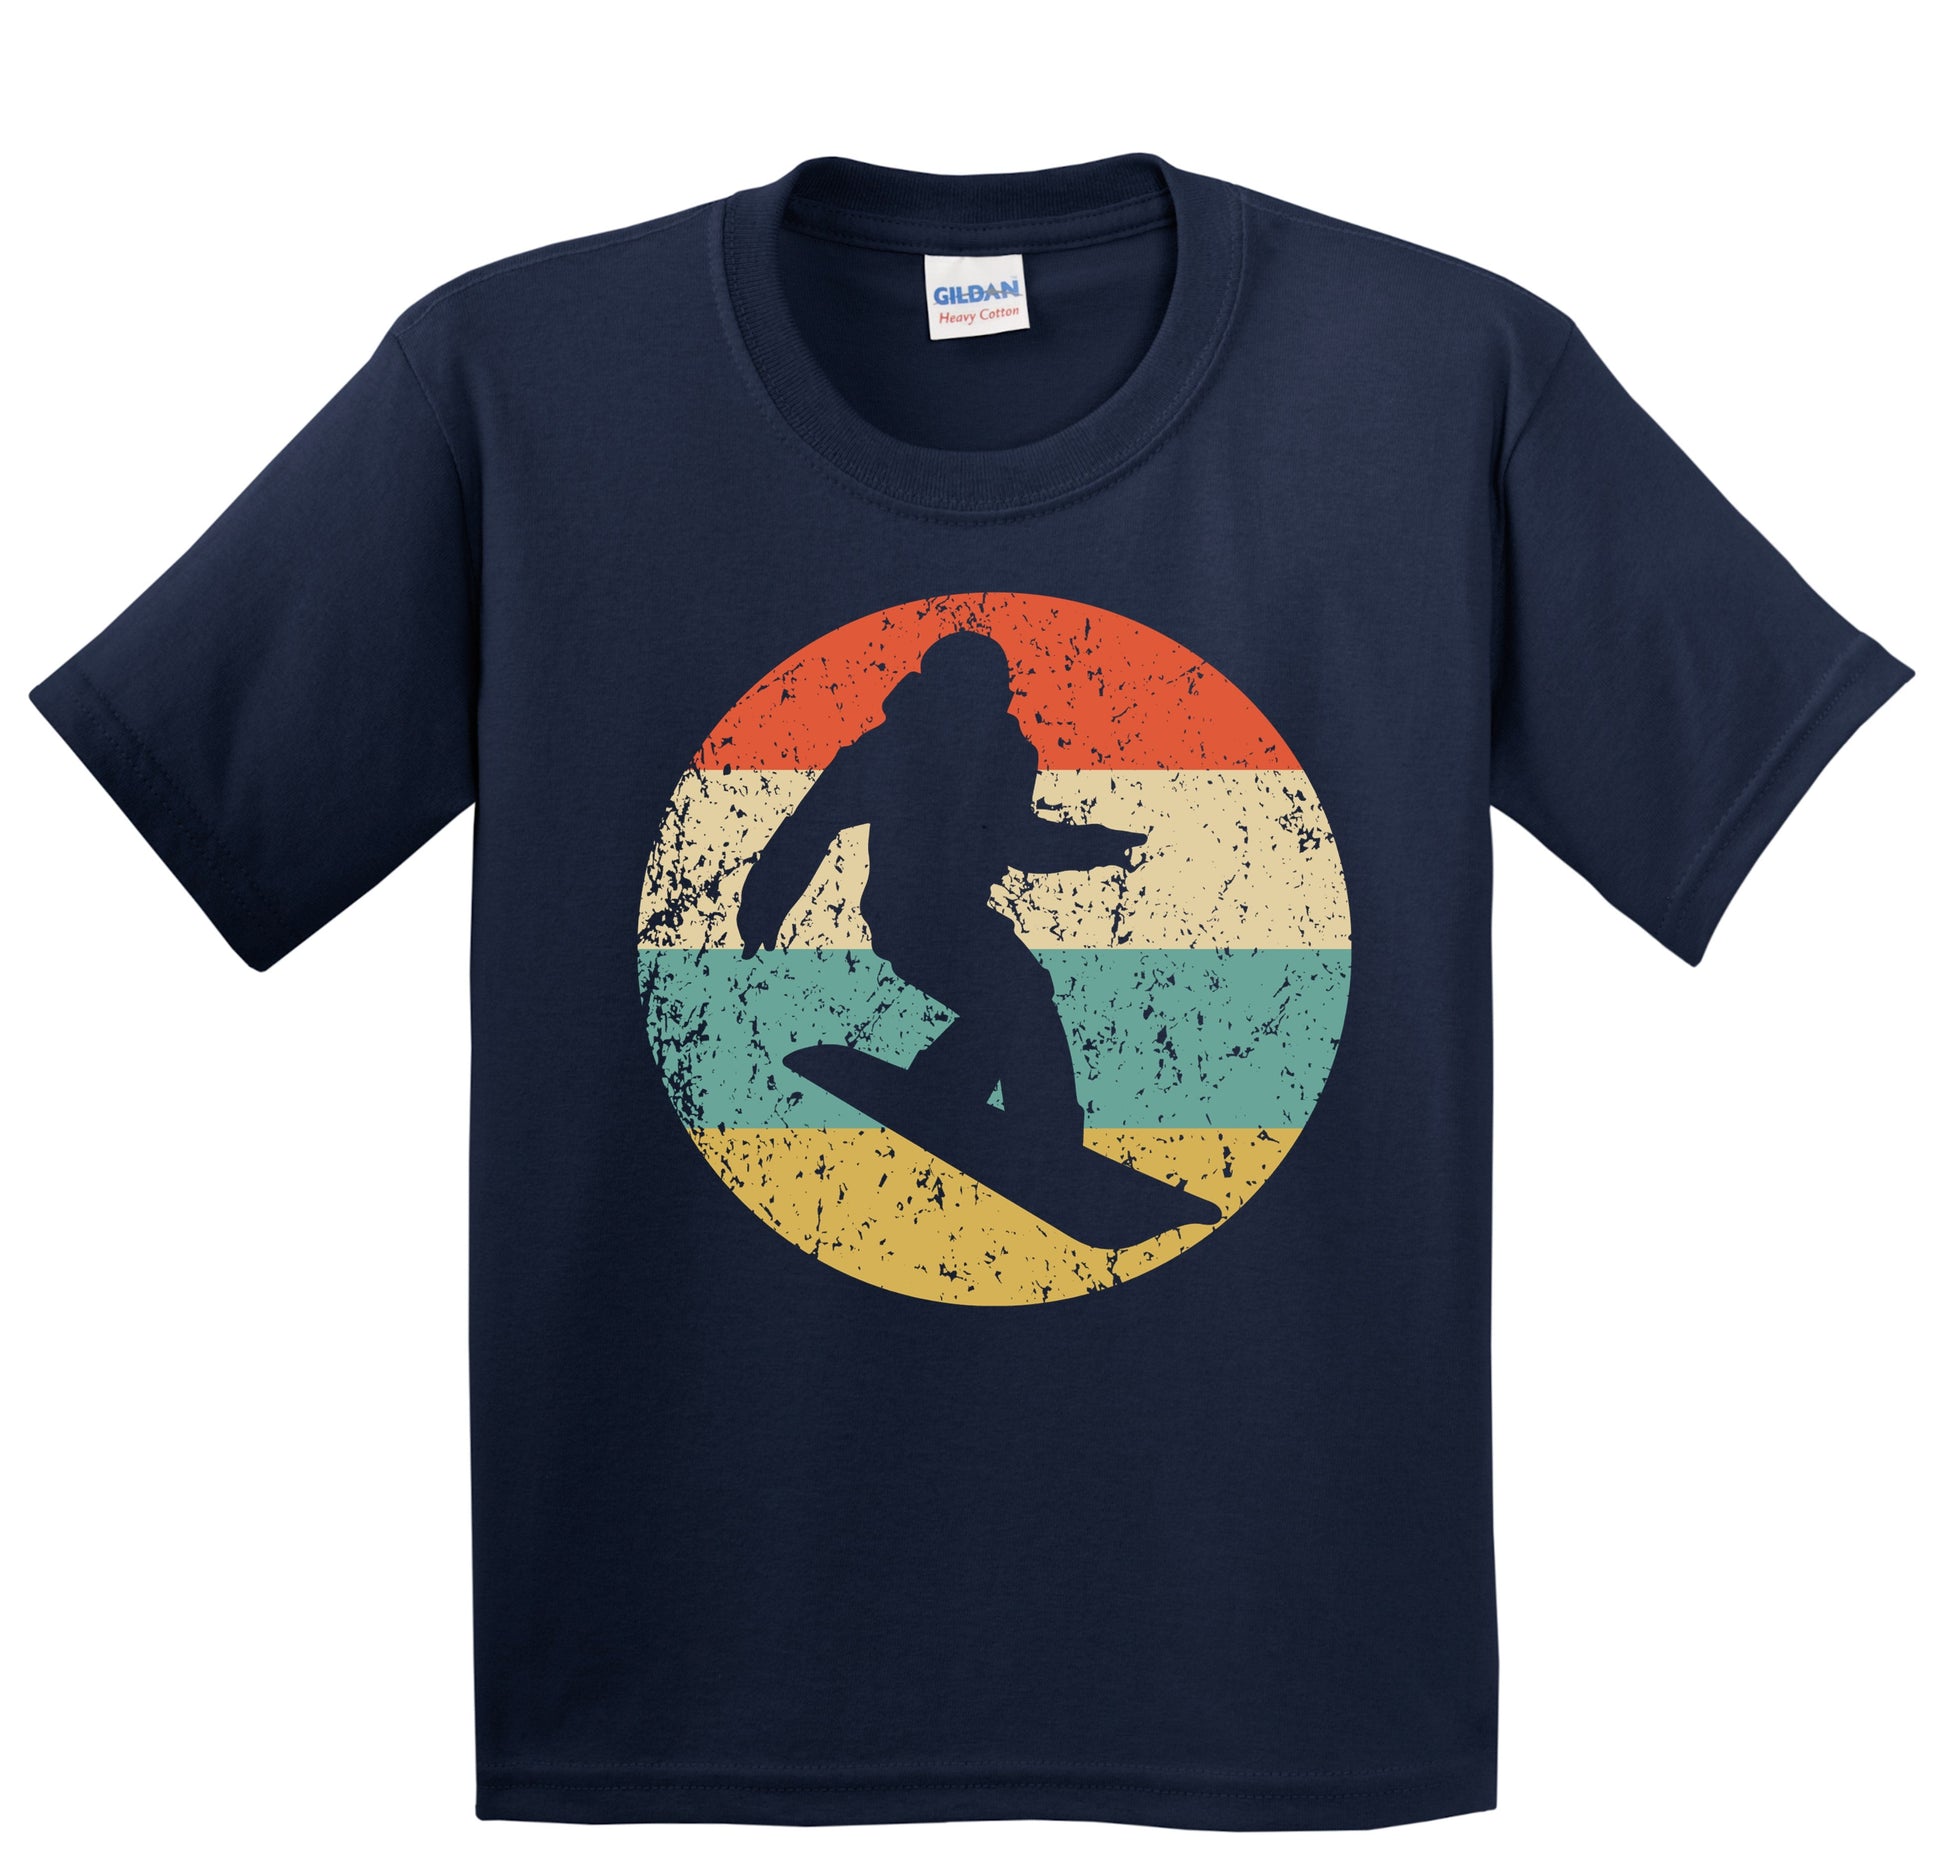 Snowboarding Snowboarder Silhouette Retro Snowboard Youth T-Shirt